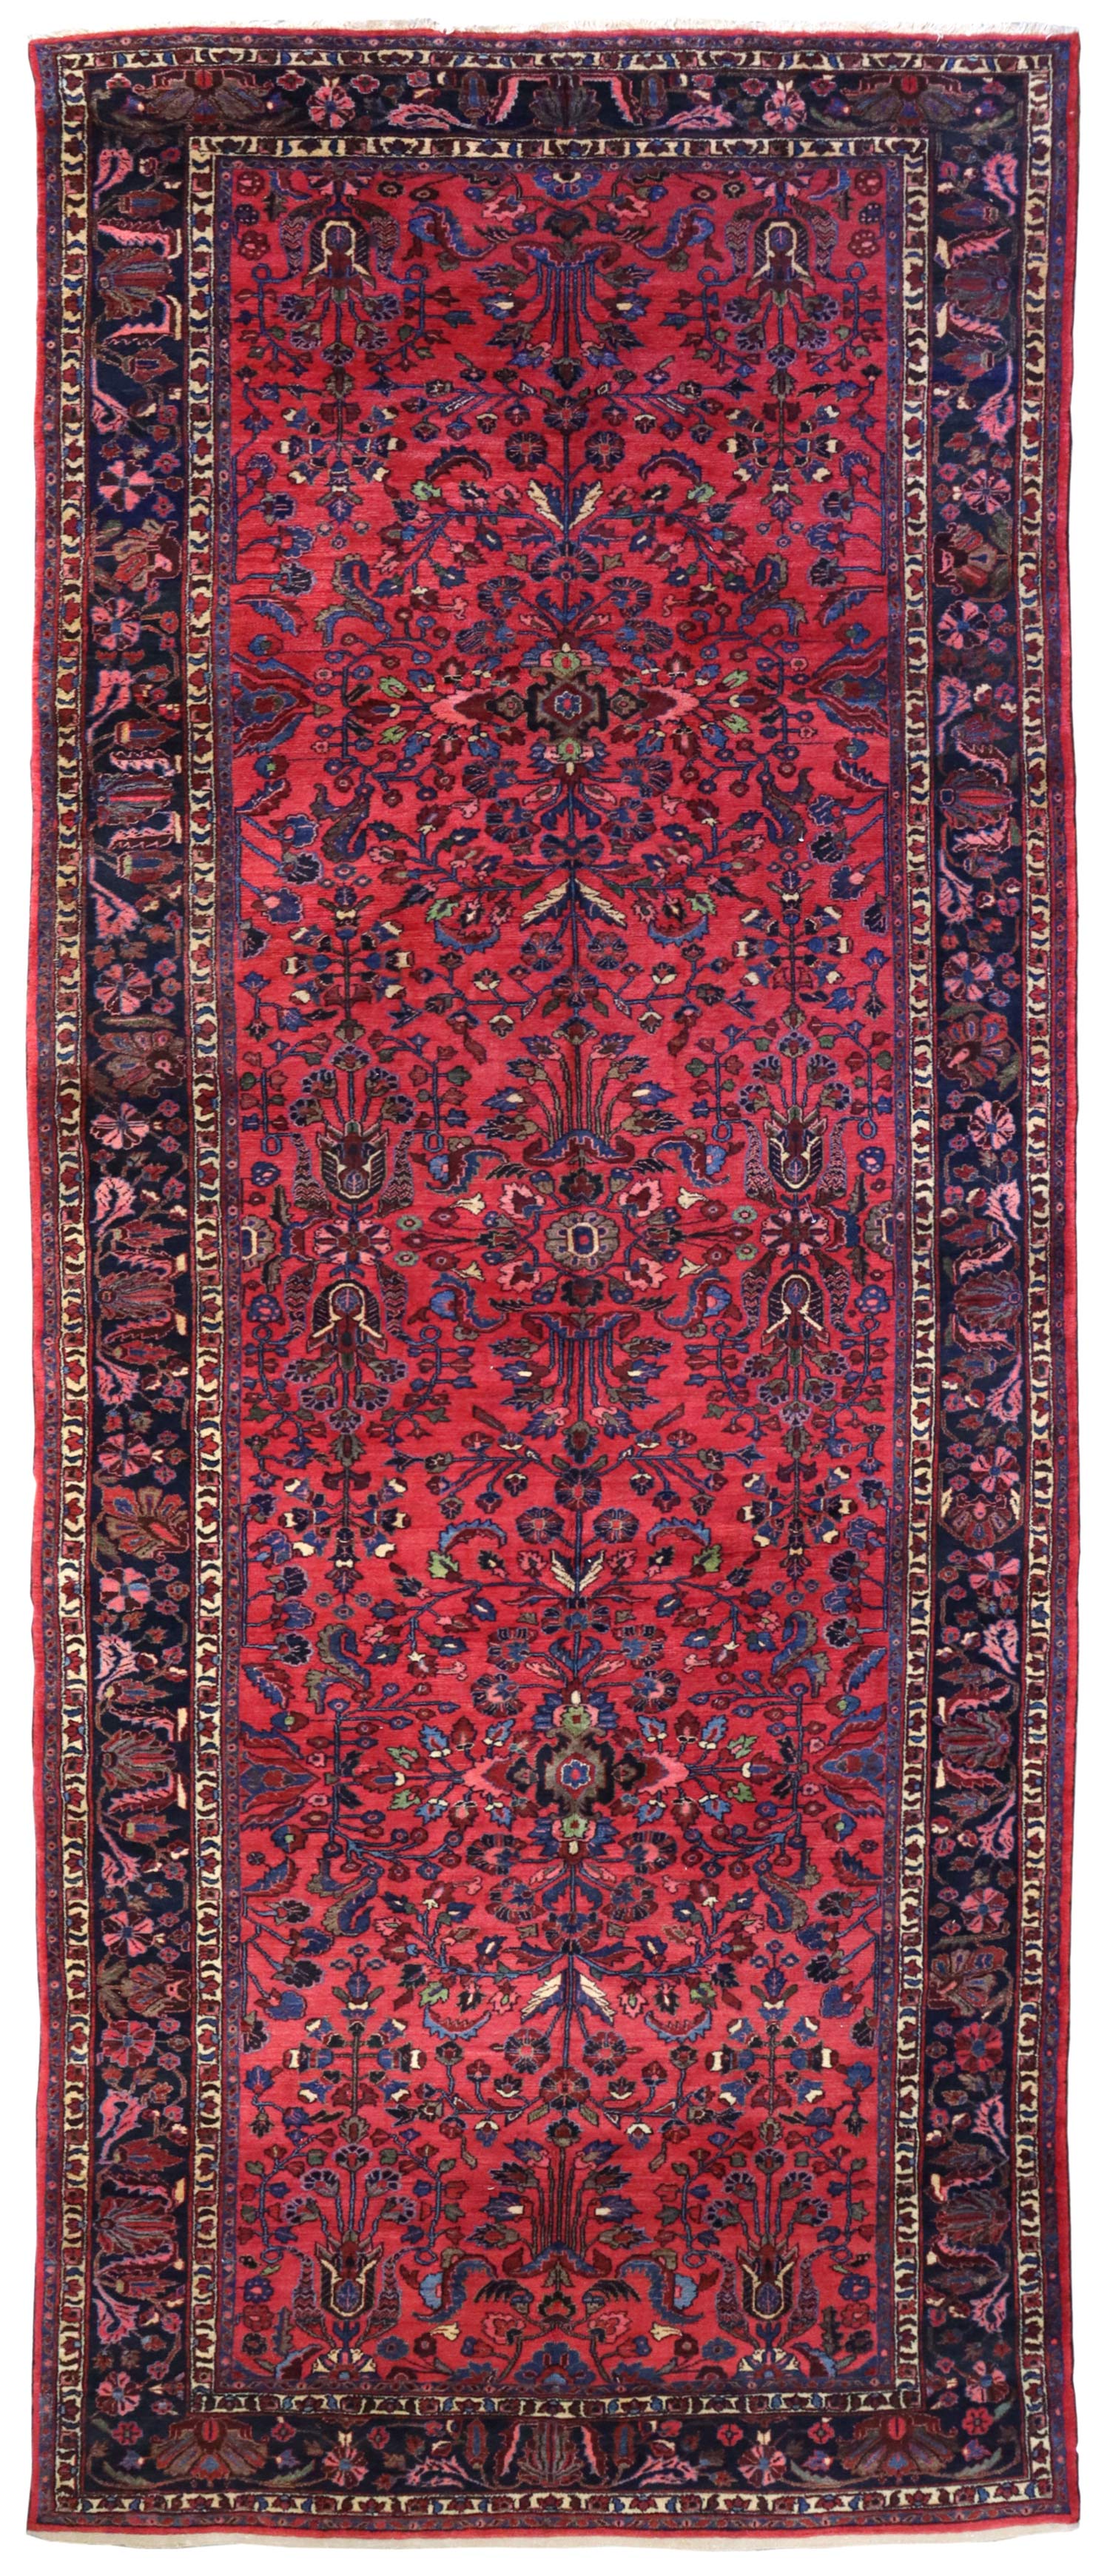 Antique Mehriban Handwoven Traditional Rug